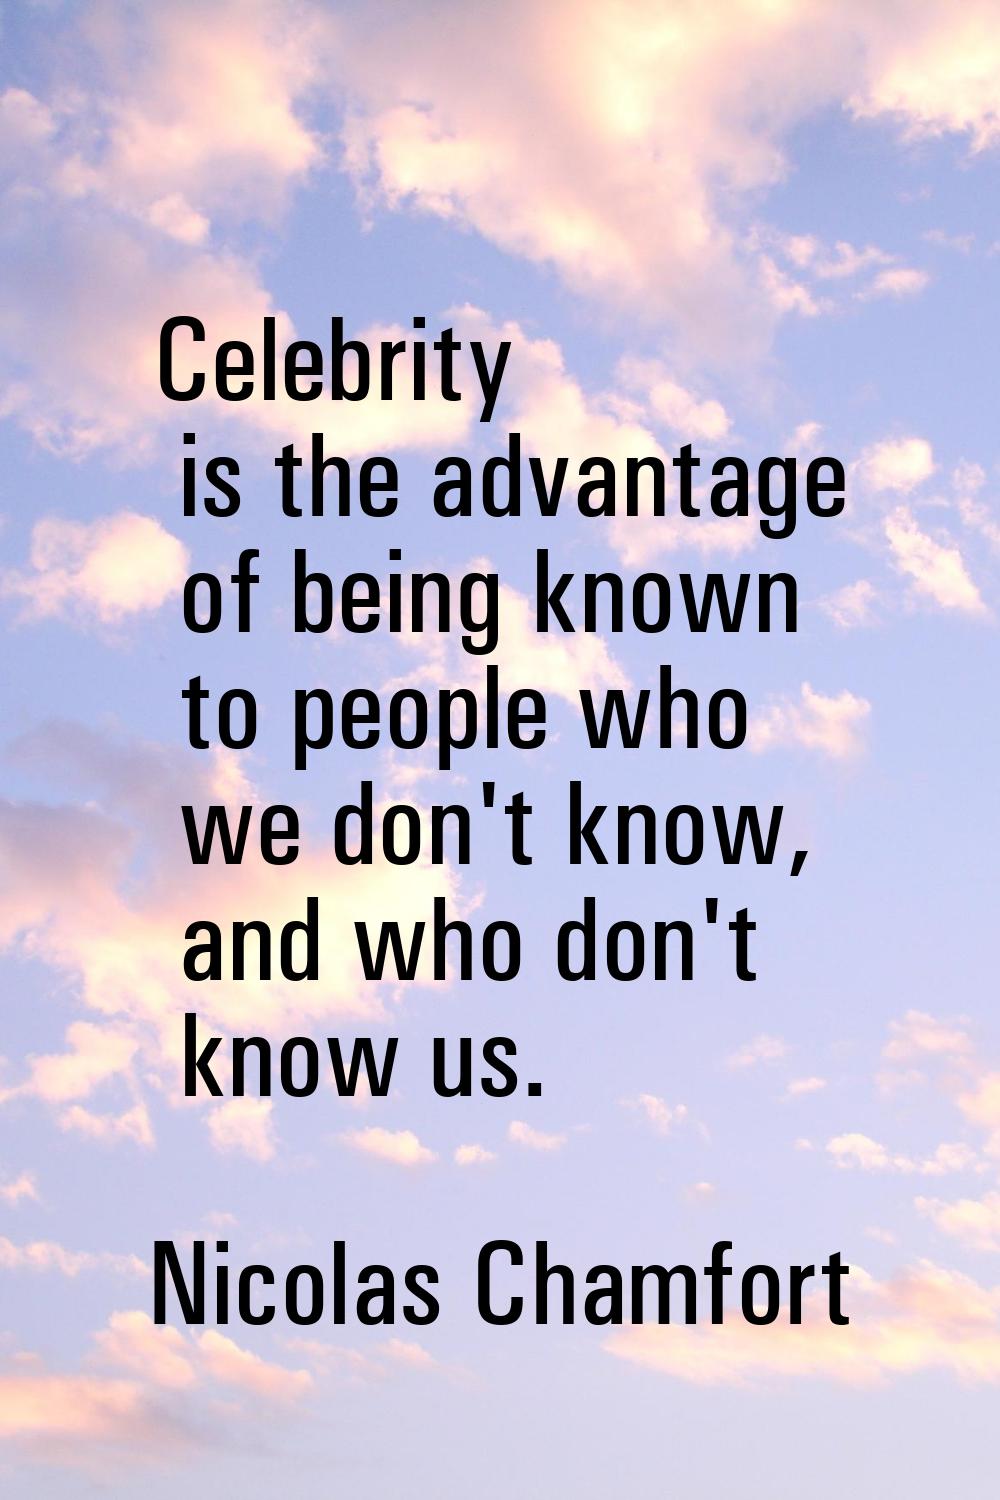 Celebrity is the advantage of being known to people who we don't know, and who don't know us.